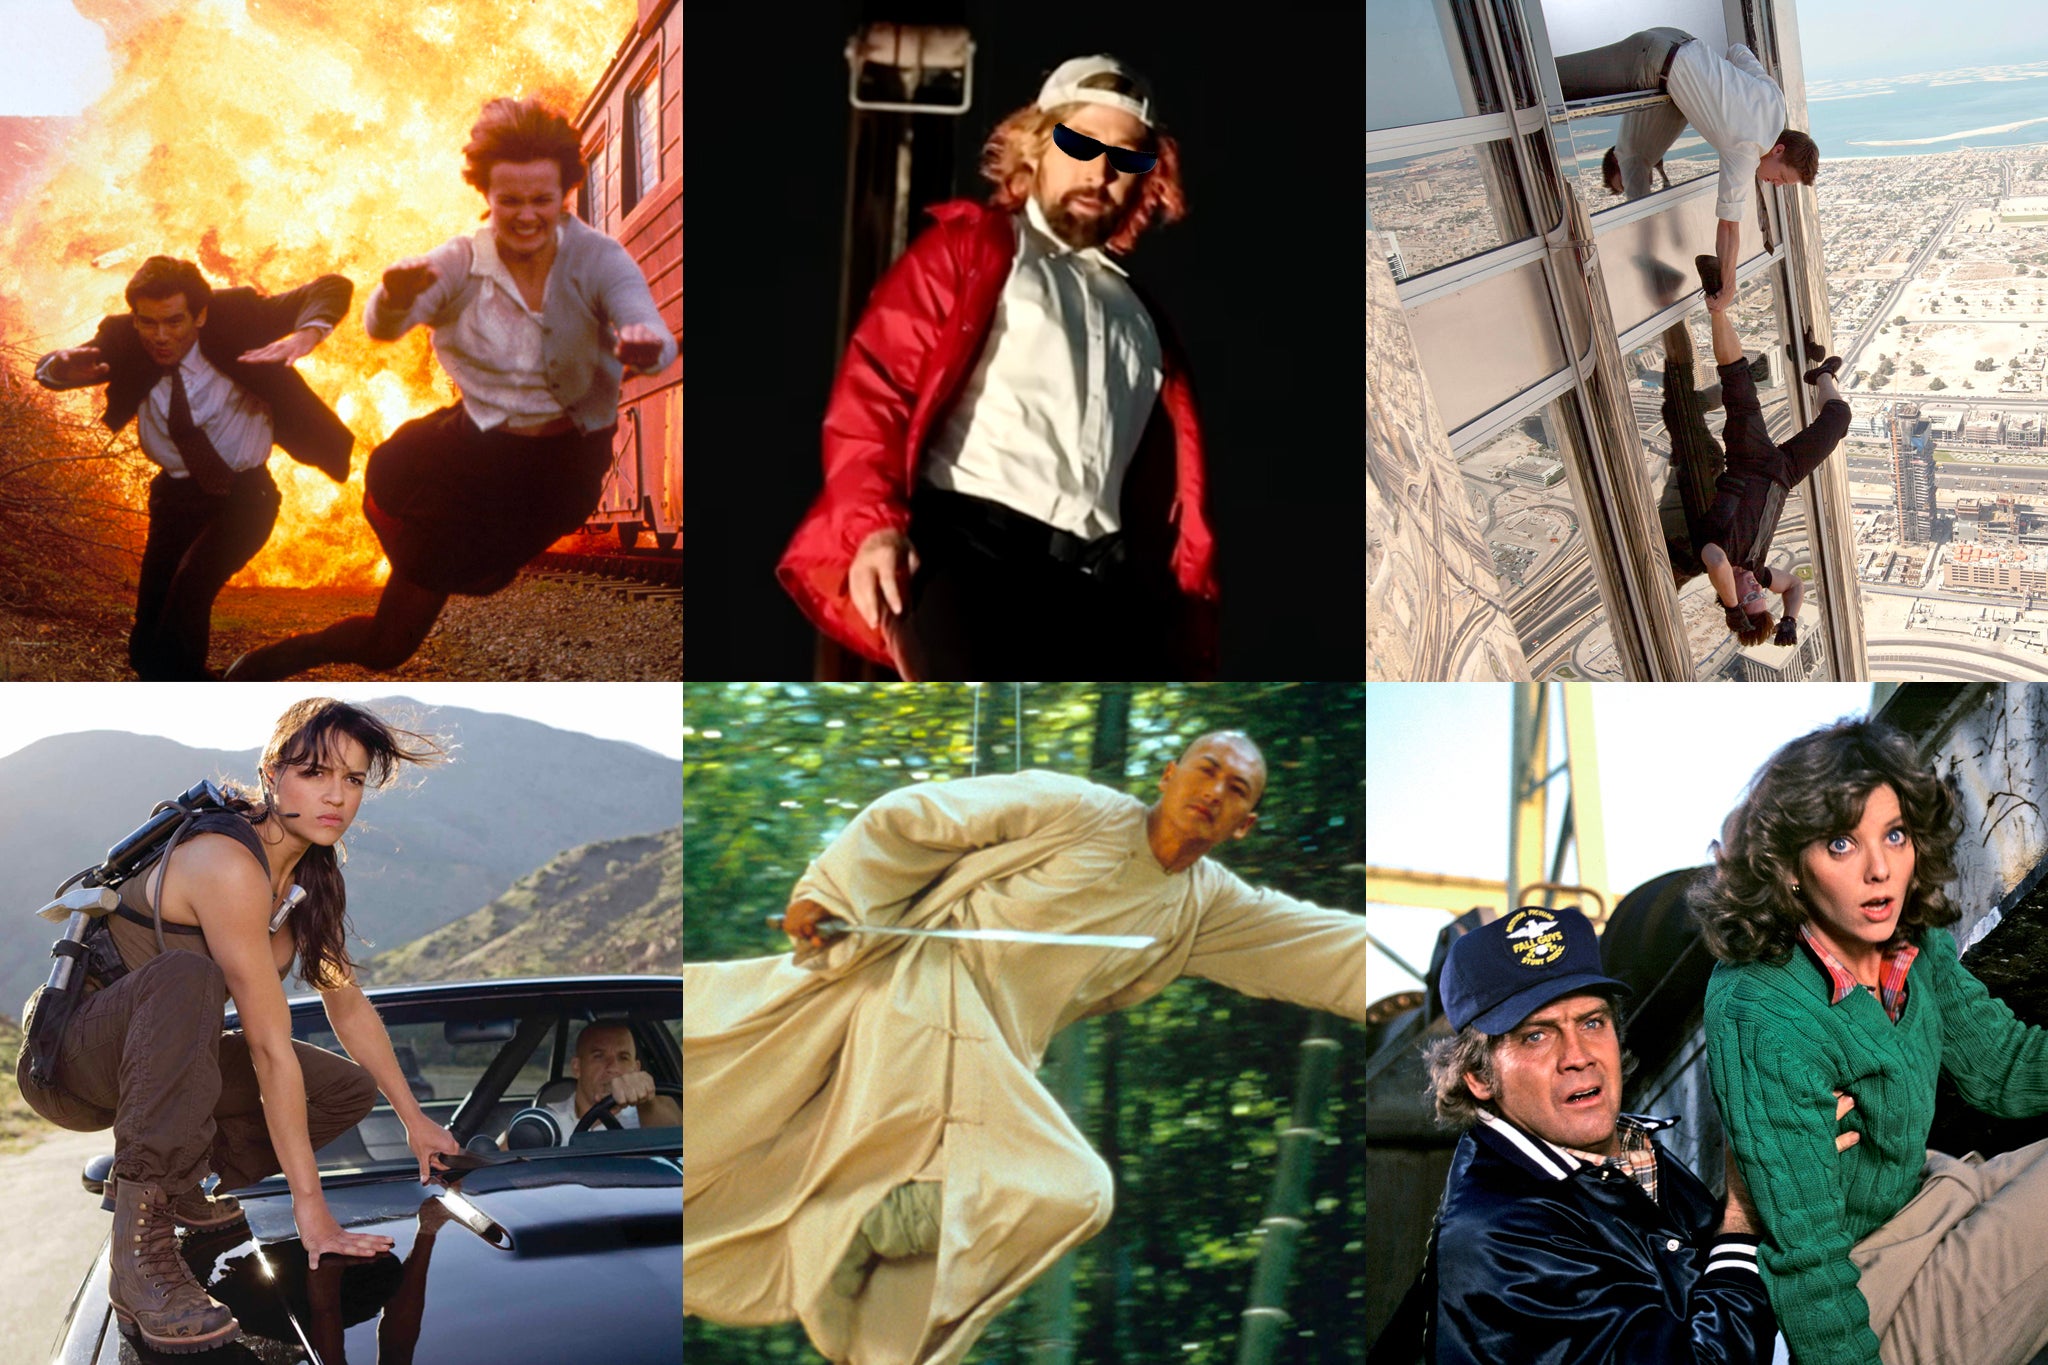 Clockwise from top left: ‘GoldenEye’; Ryan Gosling on the set of ‘The Fall Guy’; Tom Cruise on Burj Khalifa in ‘Mission Impossible 4’; Lee Majors in TV show ‘The Fall Guy’; Chow Yun-fat in ‘Crouching Tiger, Hidden Dragon’; Michelle Rodriguez in ‘Fast & Furious’